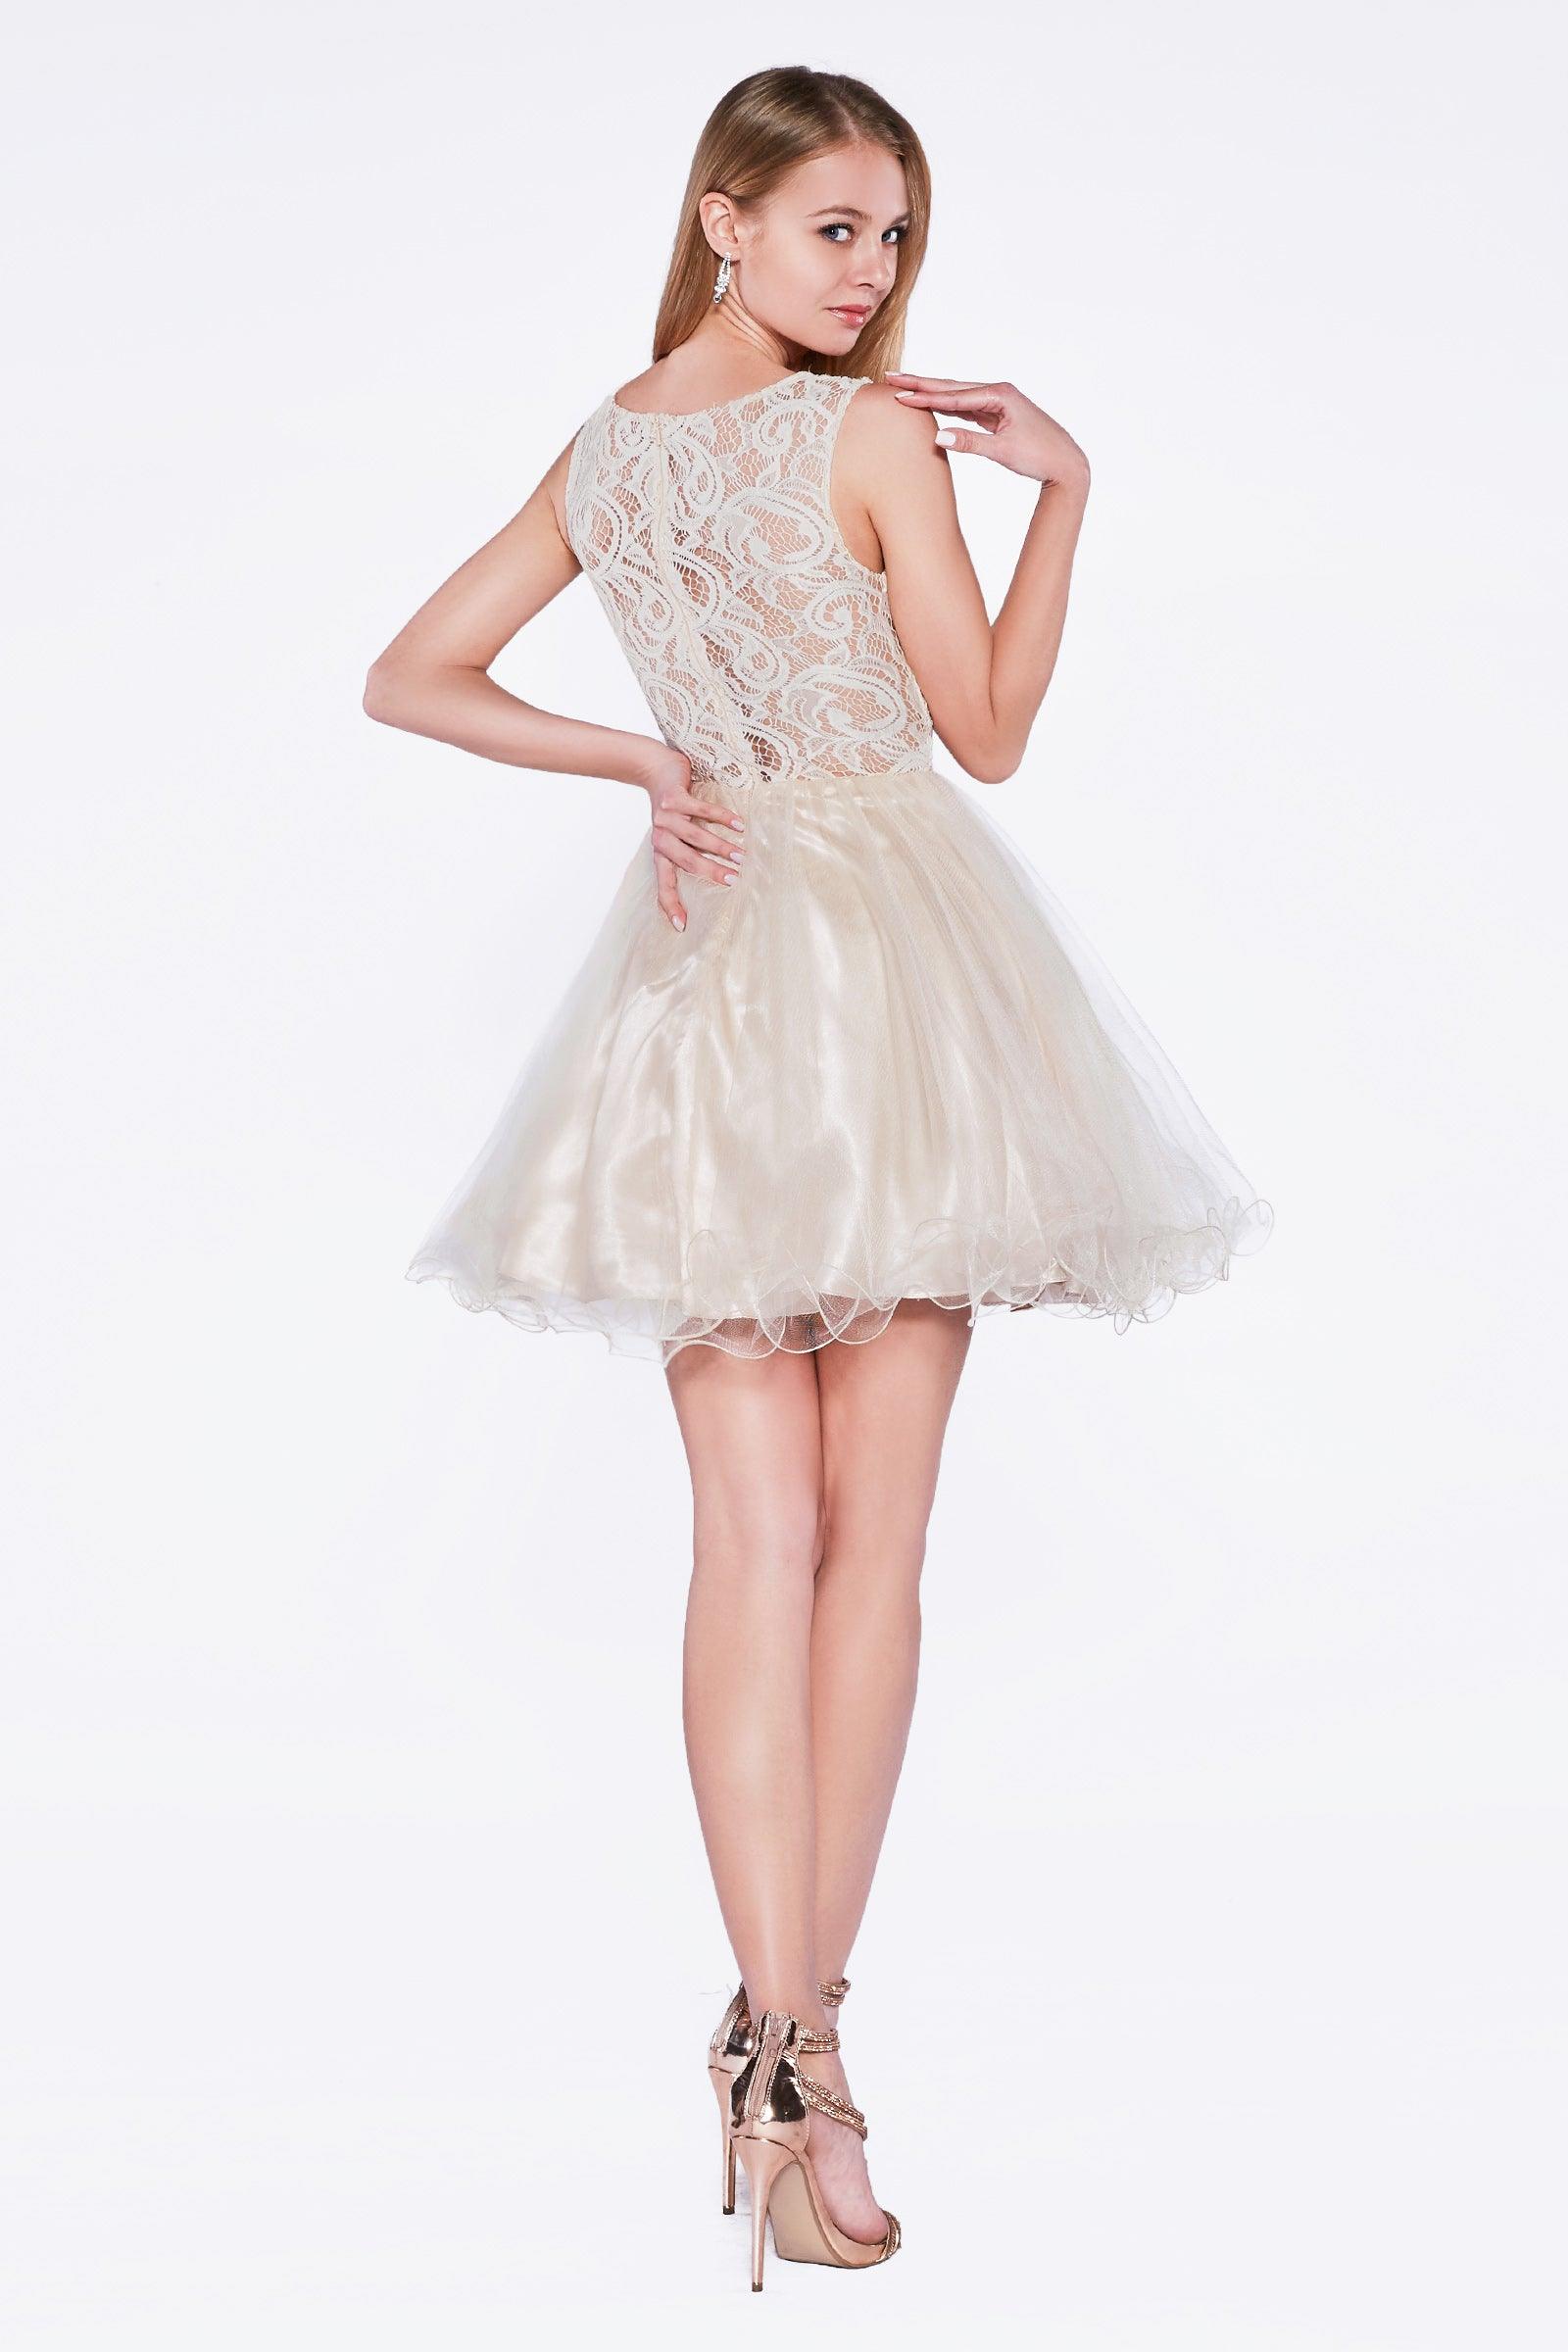 Homecoming Short Dress Beaded Lace Cocktail Prom - The Dress Outlet Cinderella Divine